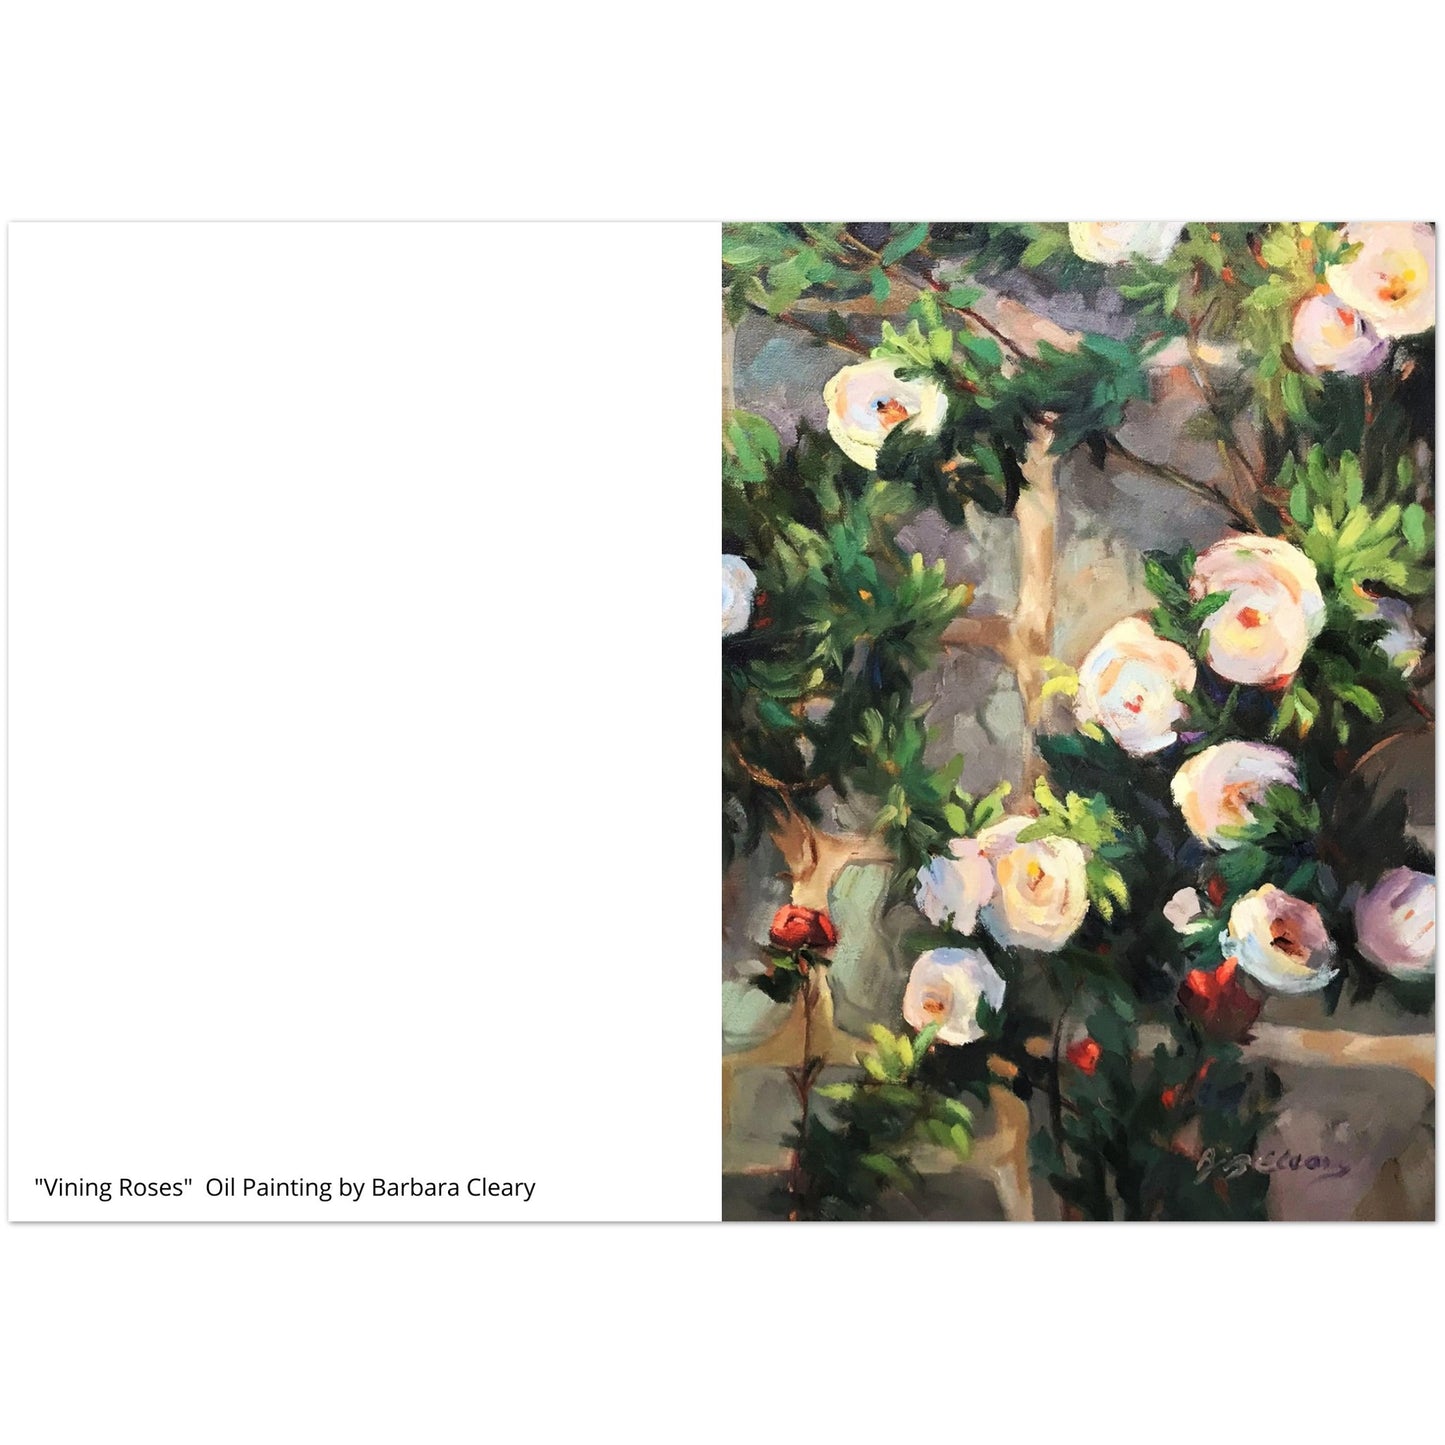 "Vining Roses" Pack of 10 Greeting Cards (standard envelopes) (US & CA) by Barbara Cleary Designs